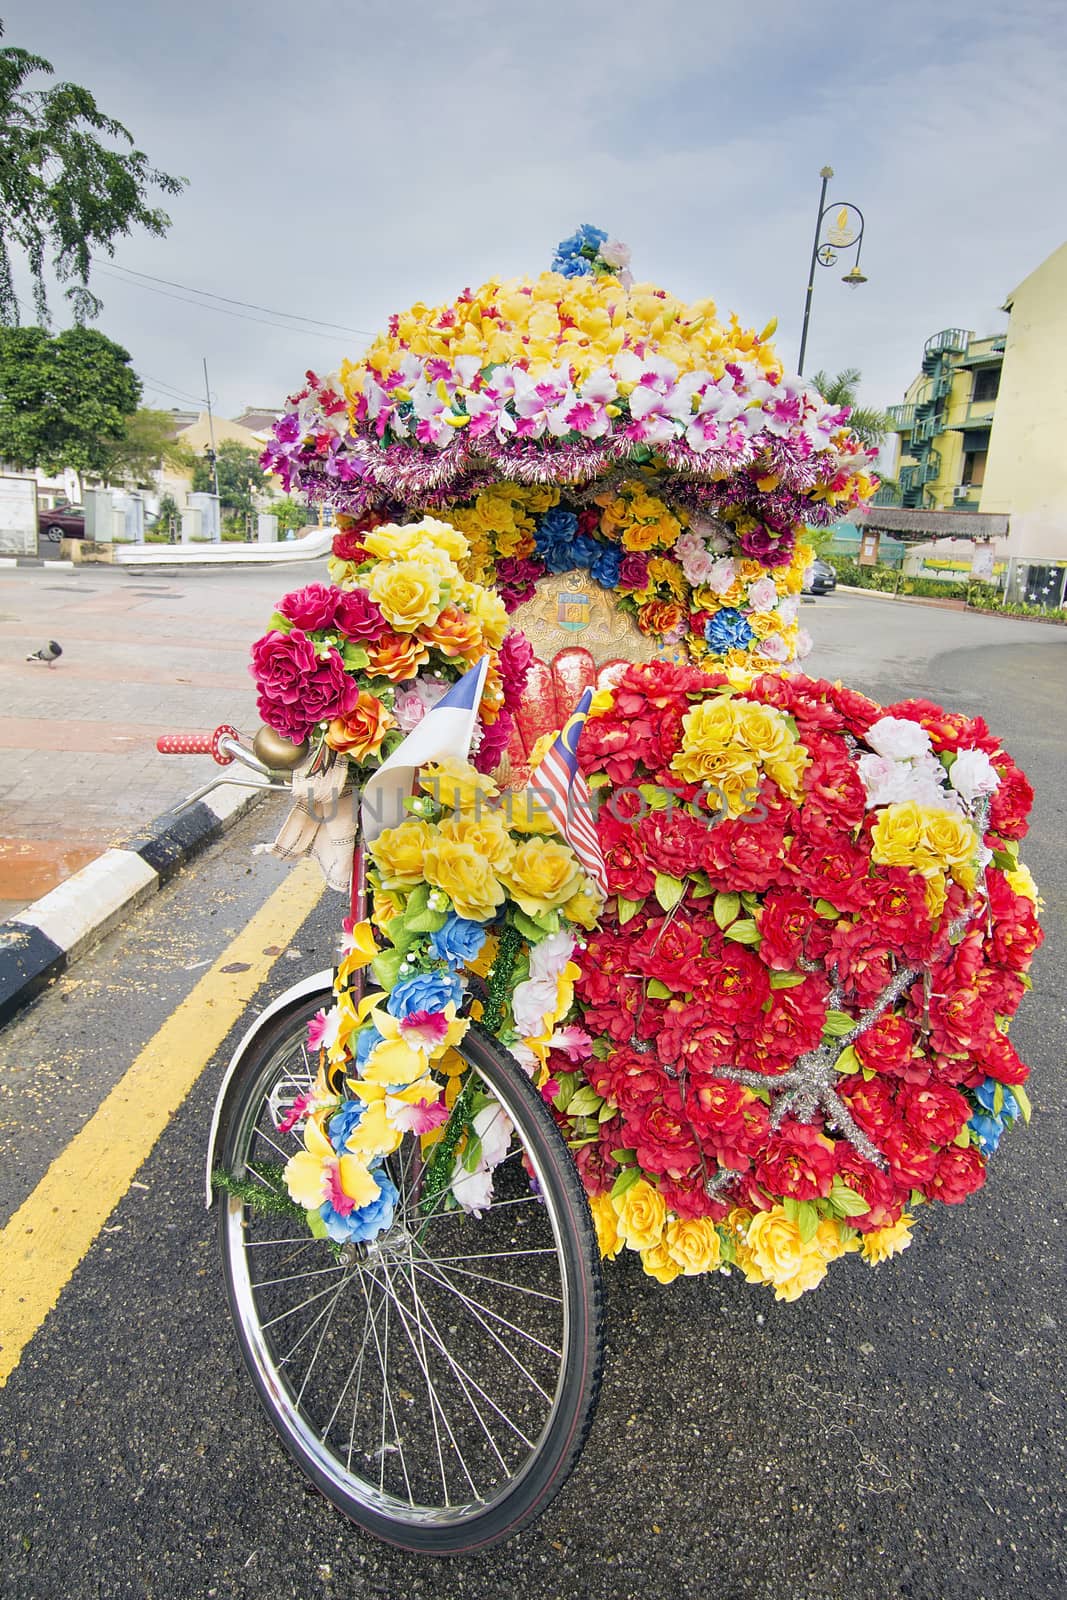 Trishaw Decorated with Colorful Silk Flowers Parked on Roadside in the Port Town of Malacca Malaysia